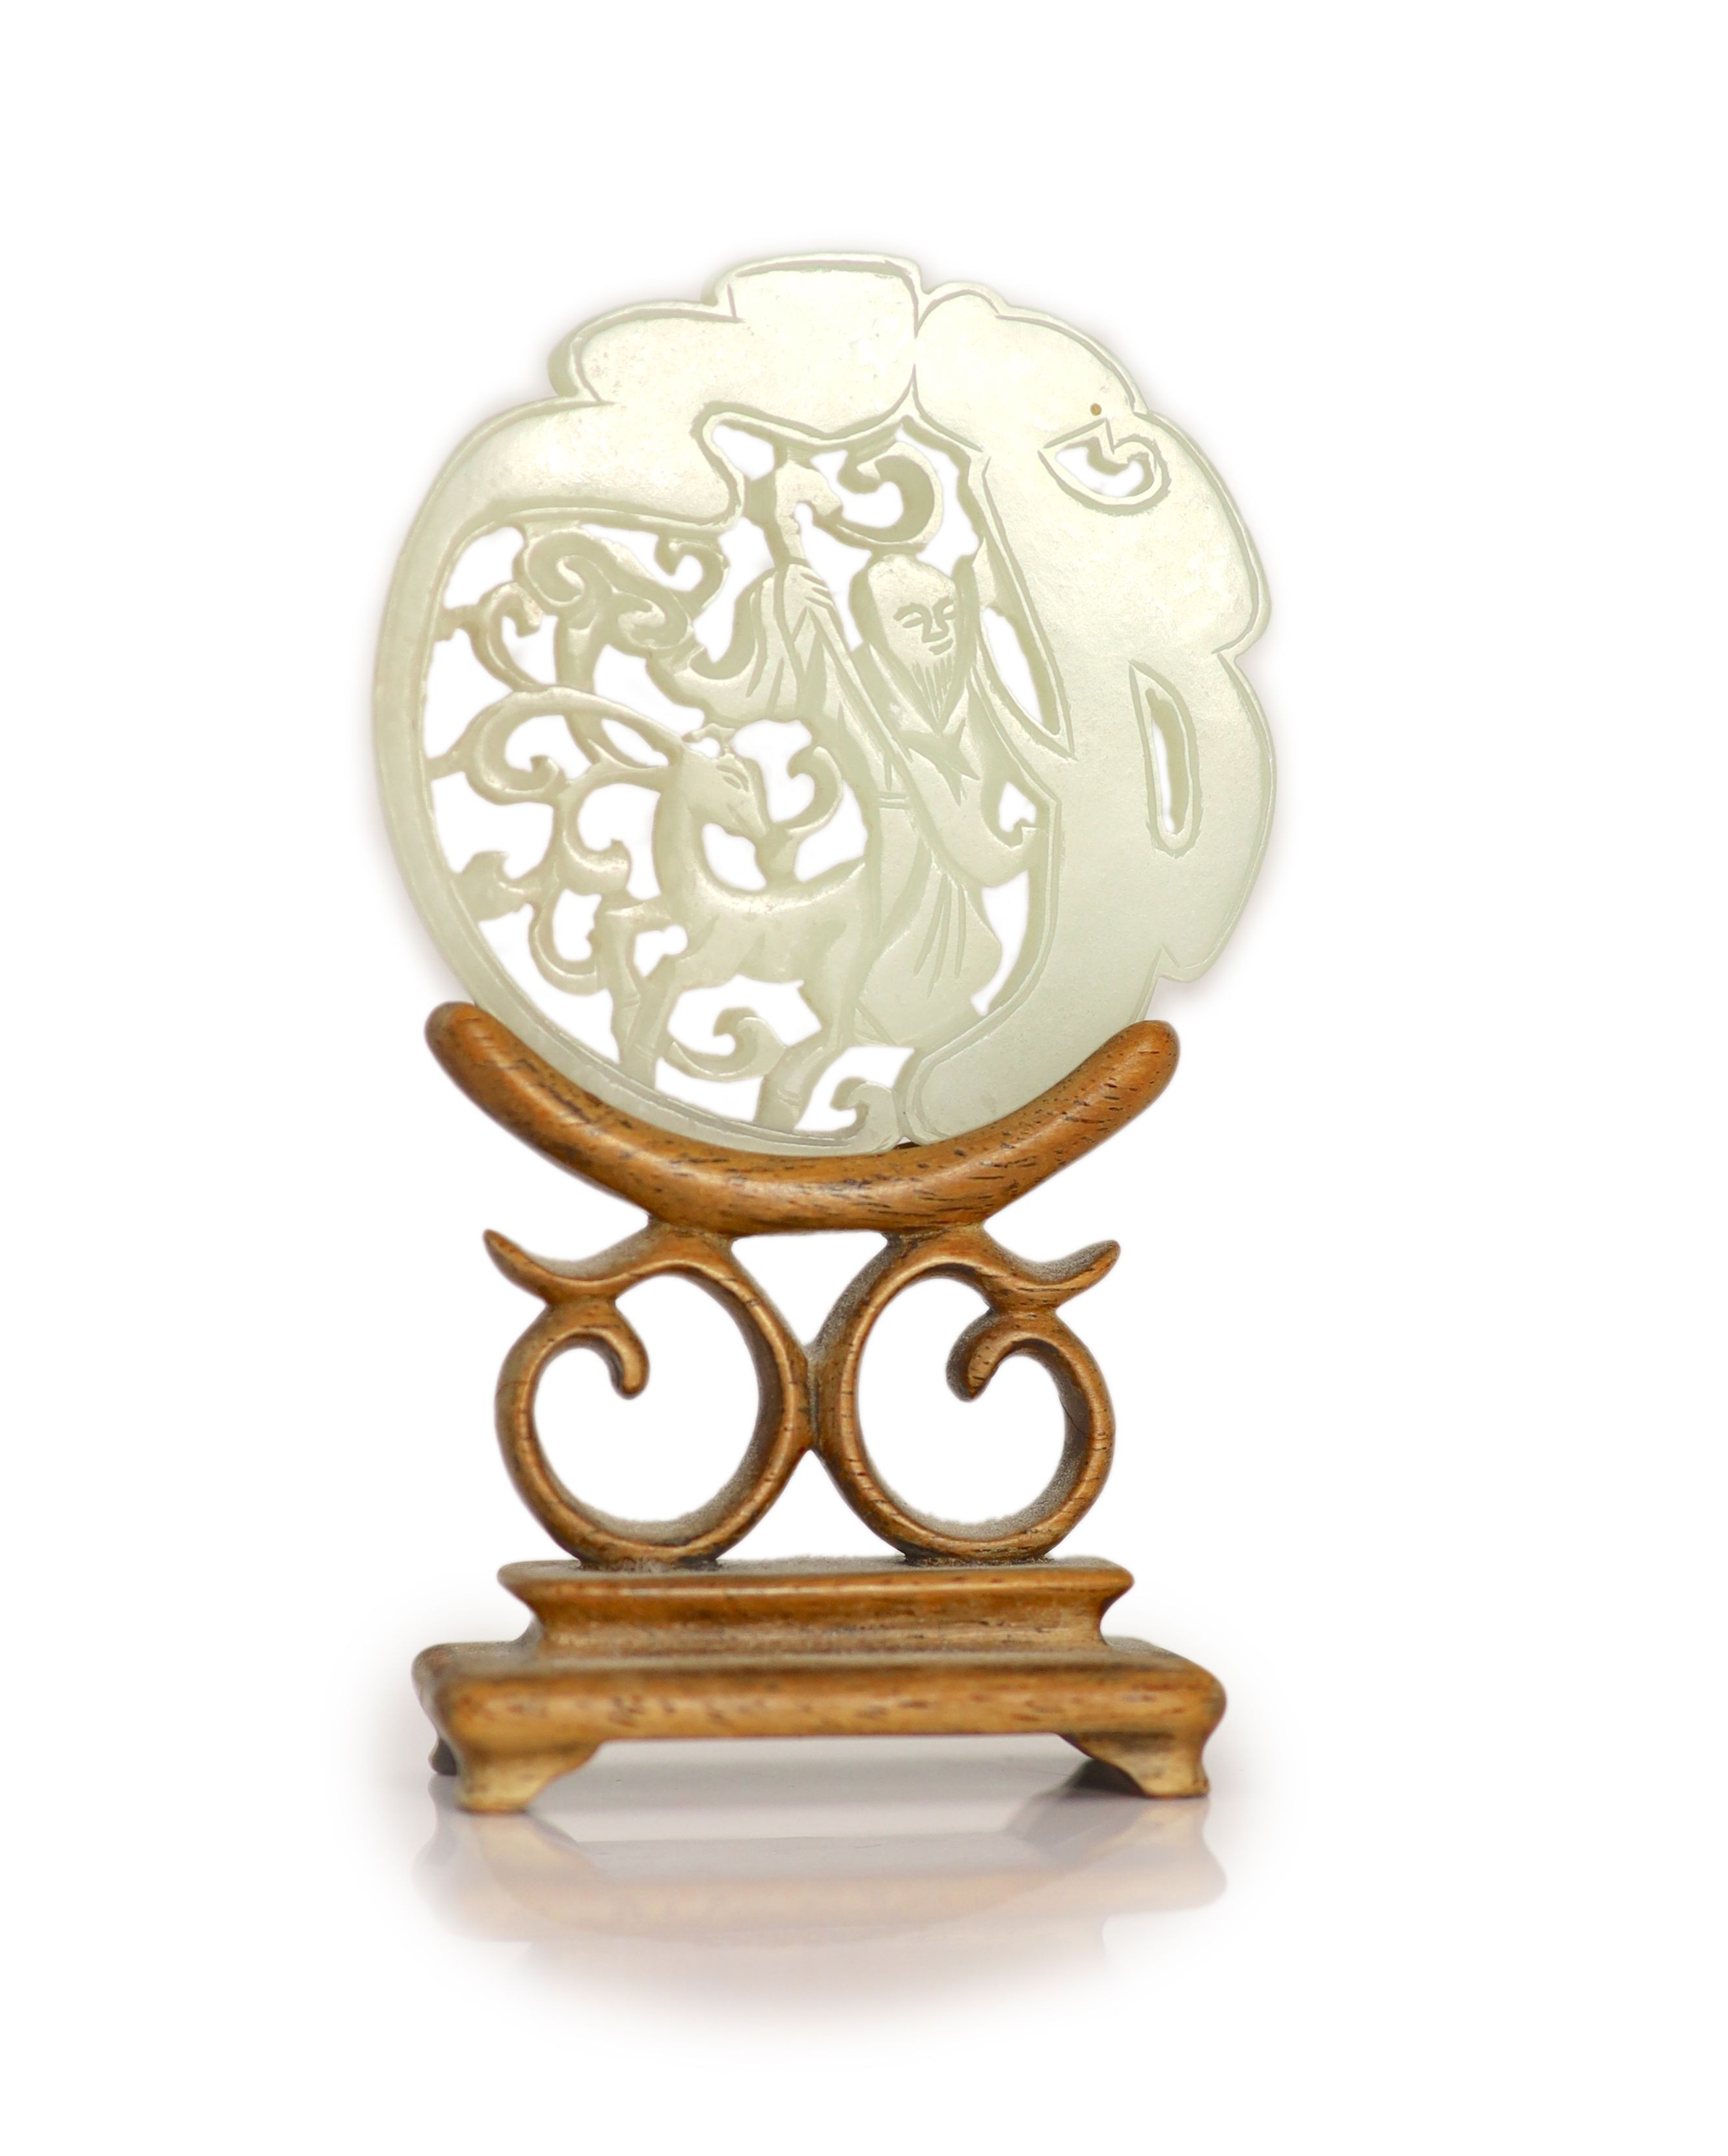 A Chinese pale celadon jade 'Shou Lao' circular plaque, 19th century, 5.3cm, wood stand